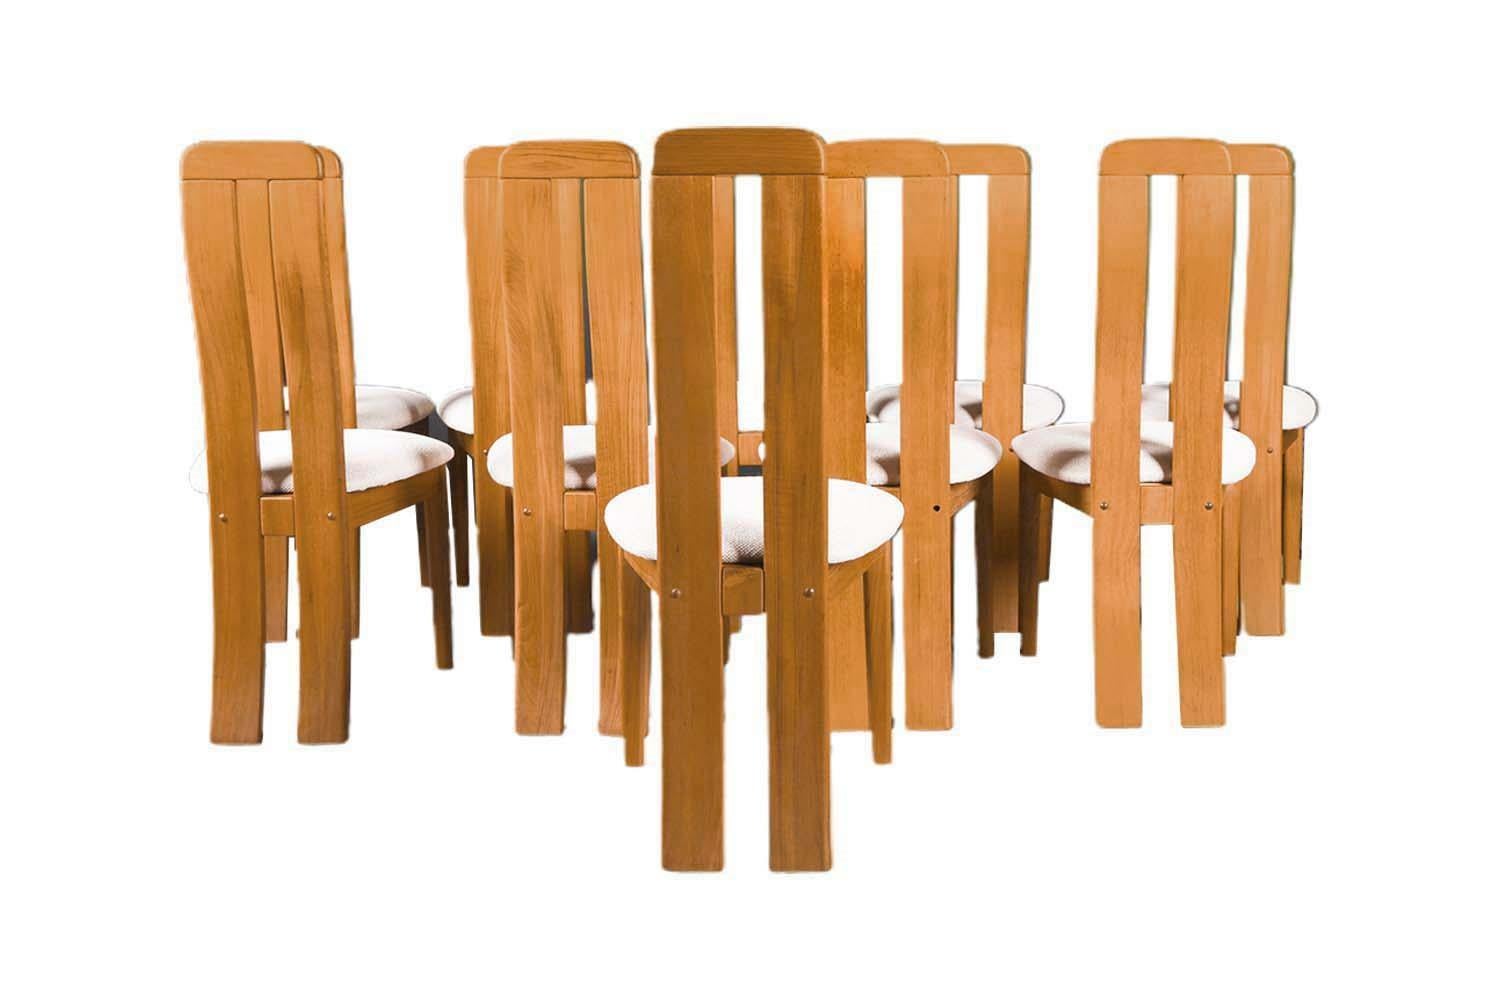 Late 20th Century Benny Linden Mid-Century Modern Sculpted High Back Teak Chairs 10